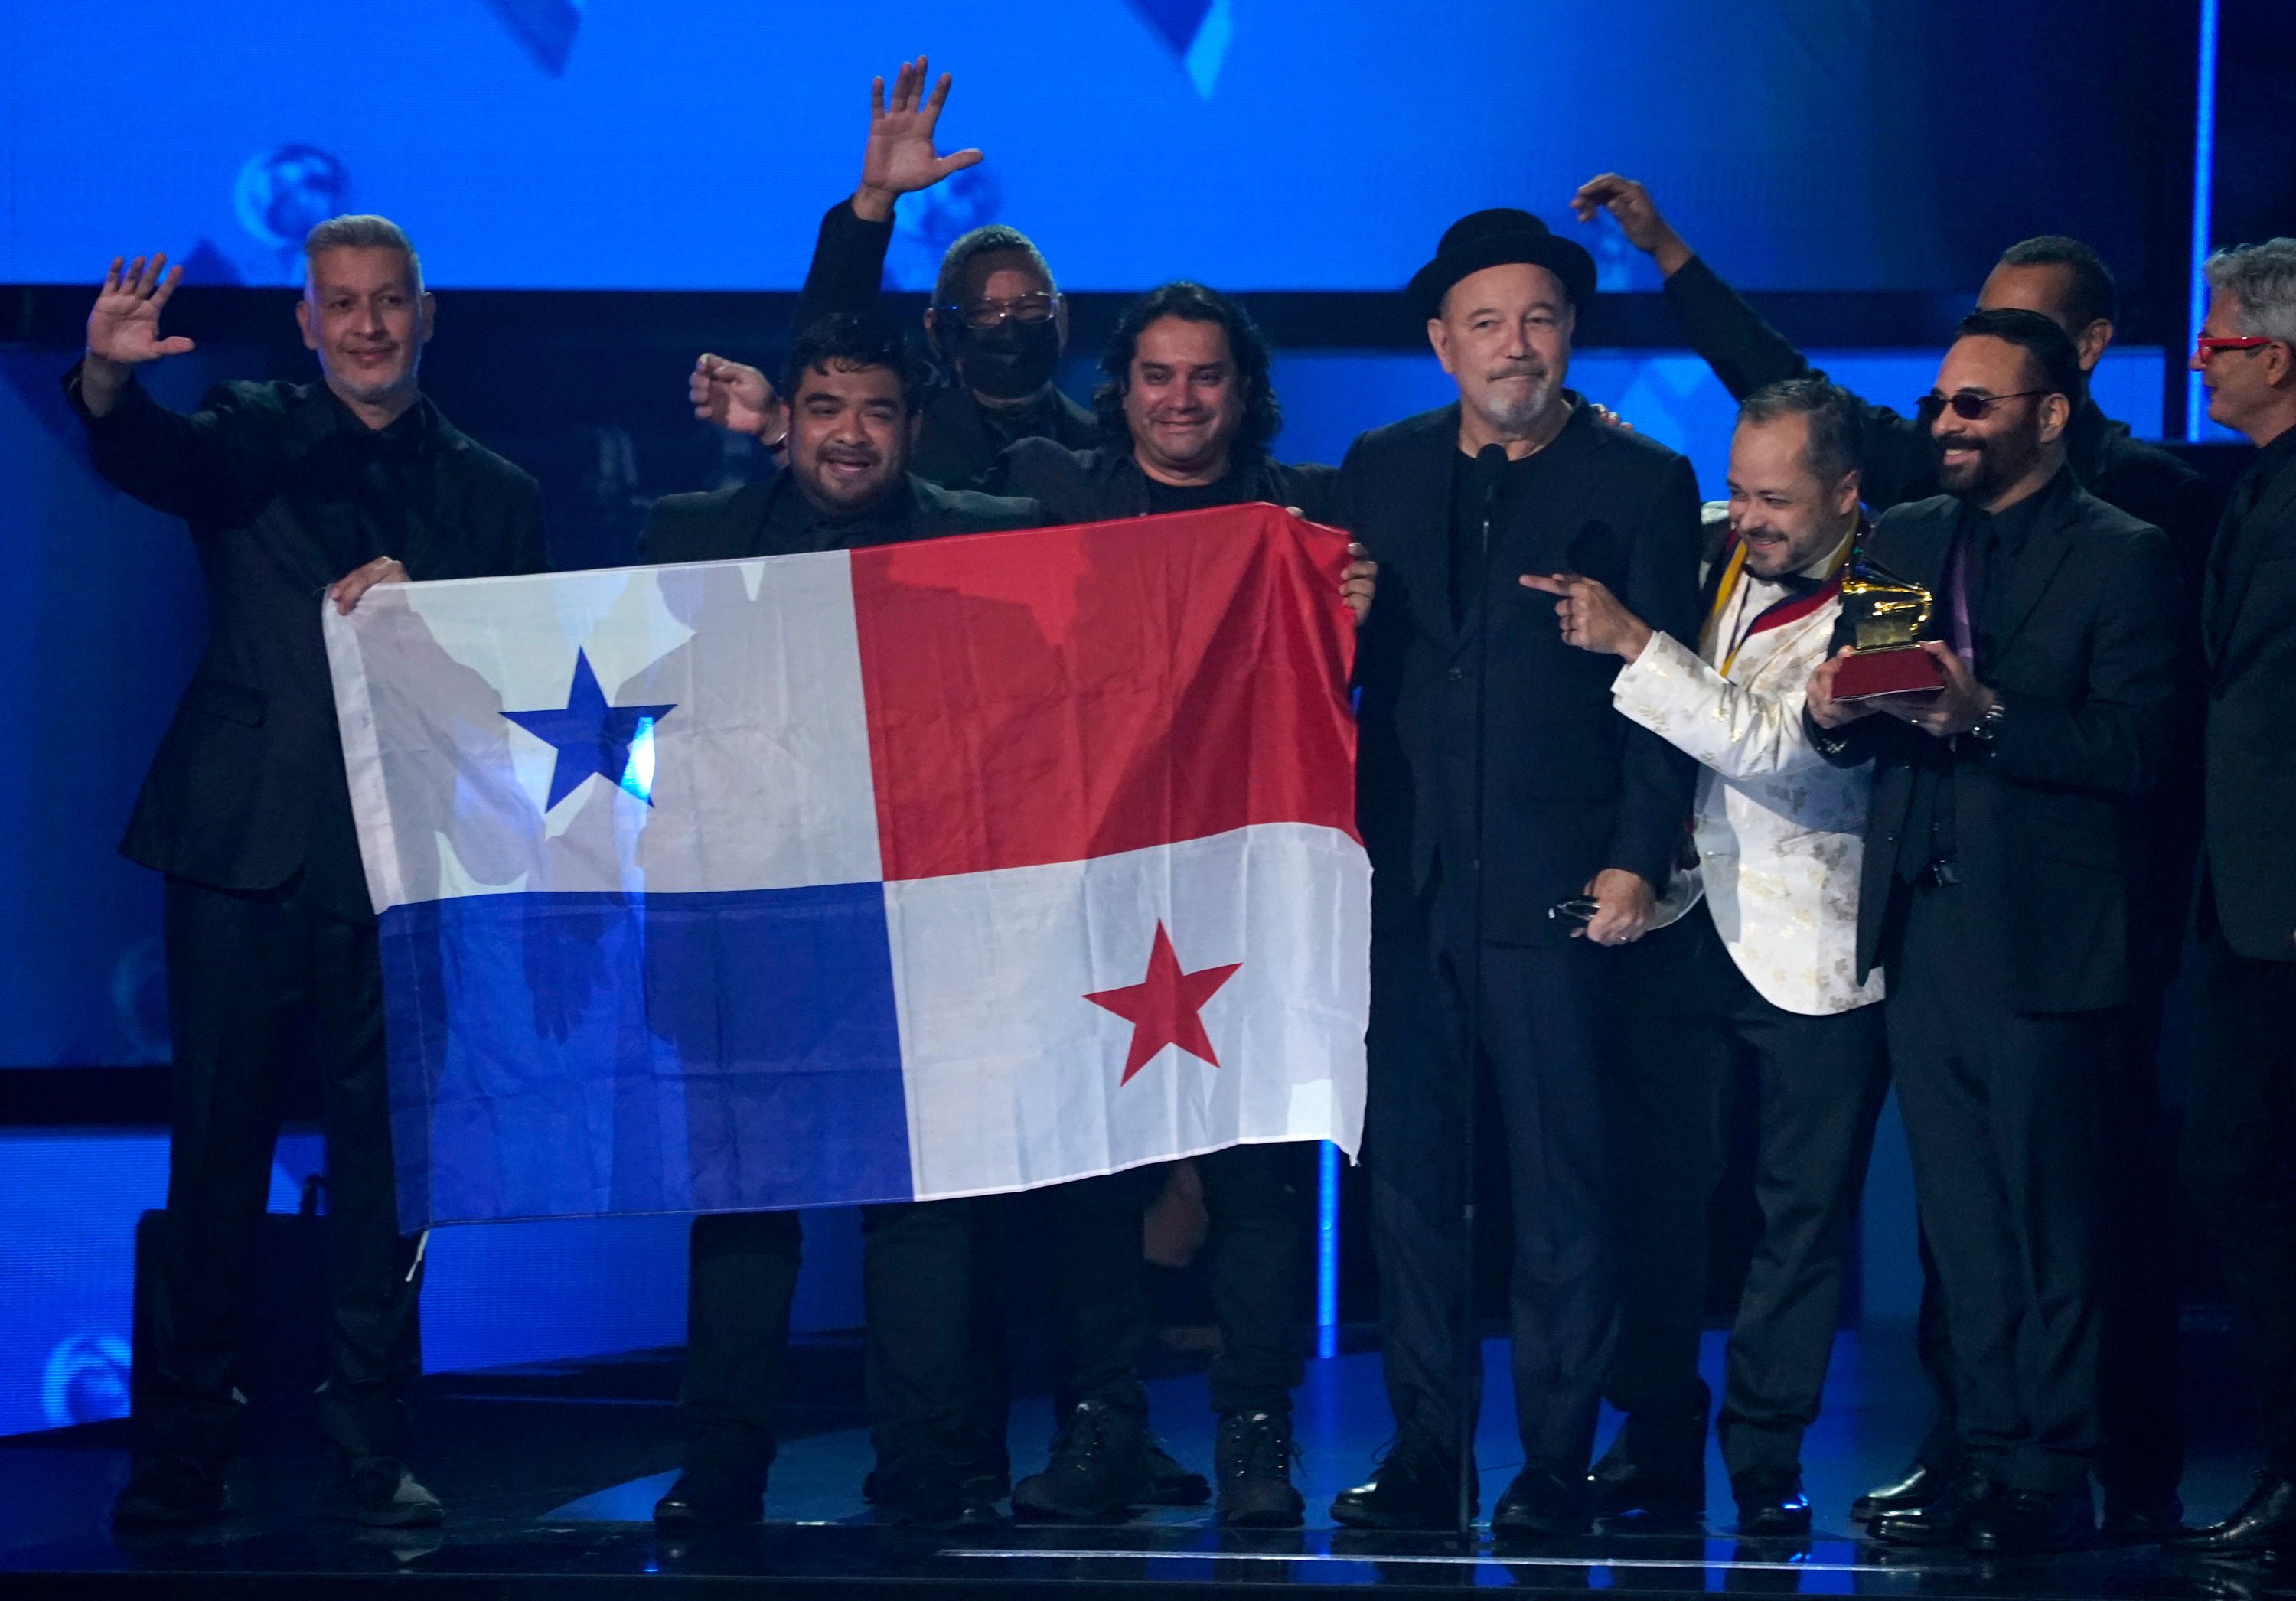 Ruben Blades, third from right, Roberto Delgado, right, and his orchestra accept the award for album of the year for "Salswing!" while holding up the flag of Panama.